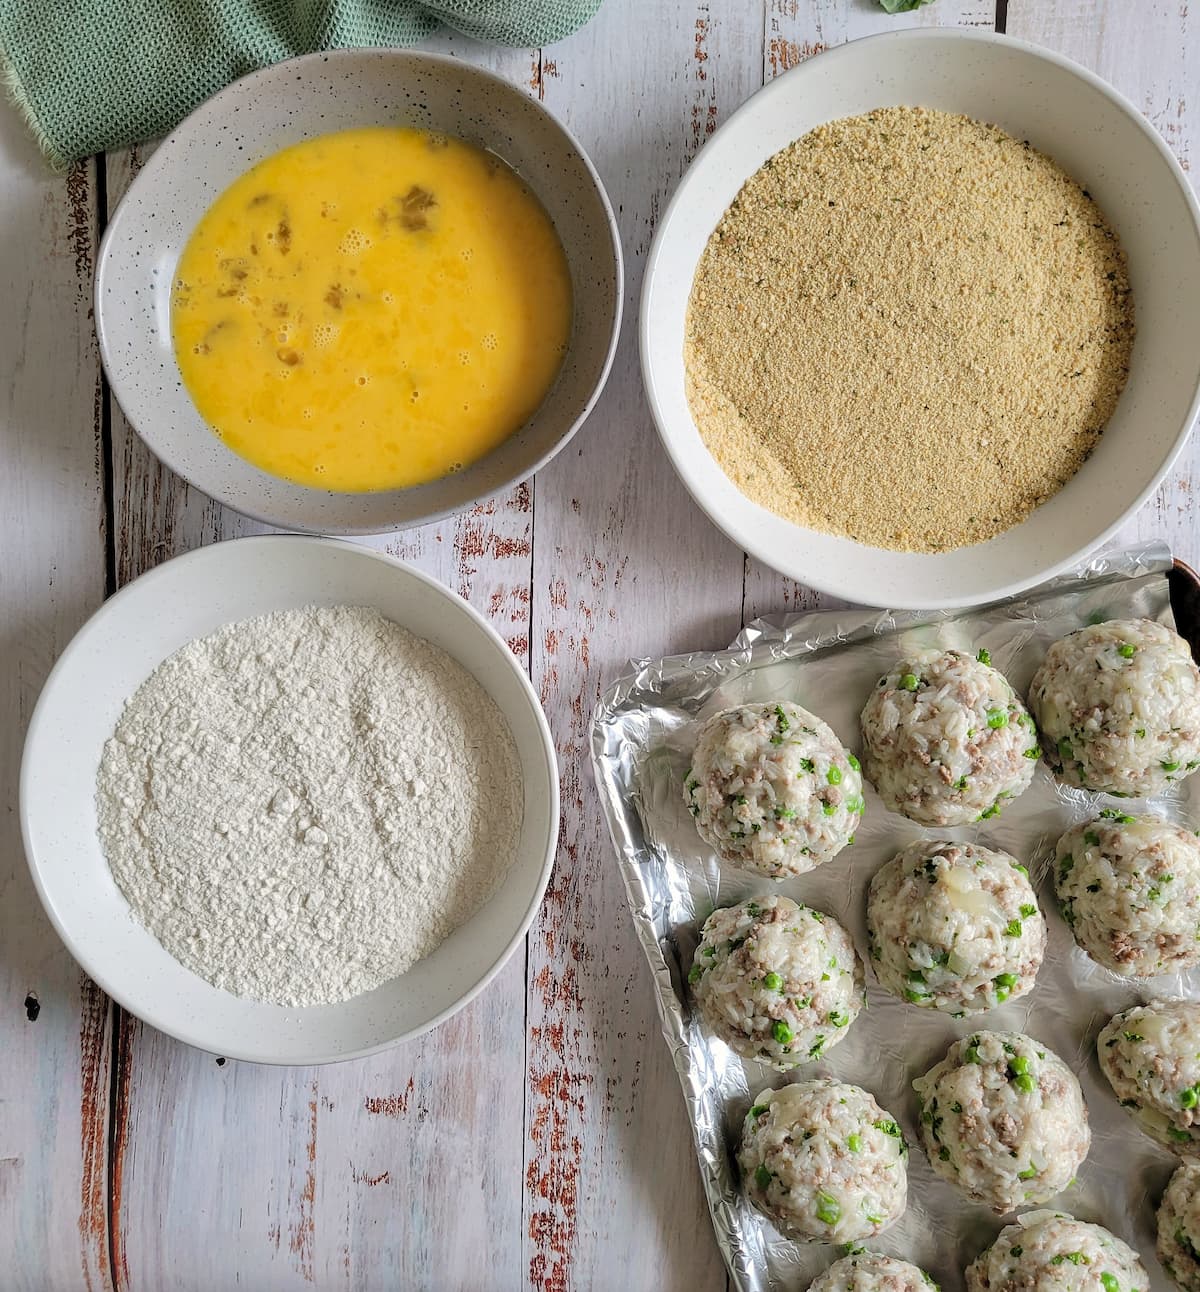 3 dredge bowl - 1 flour, 1 egg, 1 breadcrumbs next to a sheet pan with unbreaded rice balls